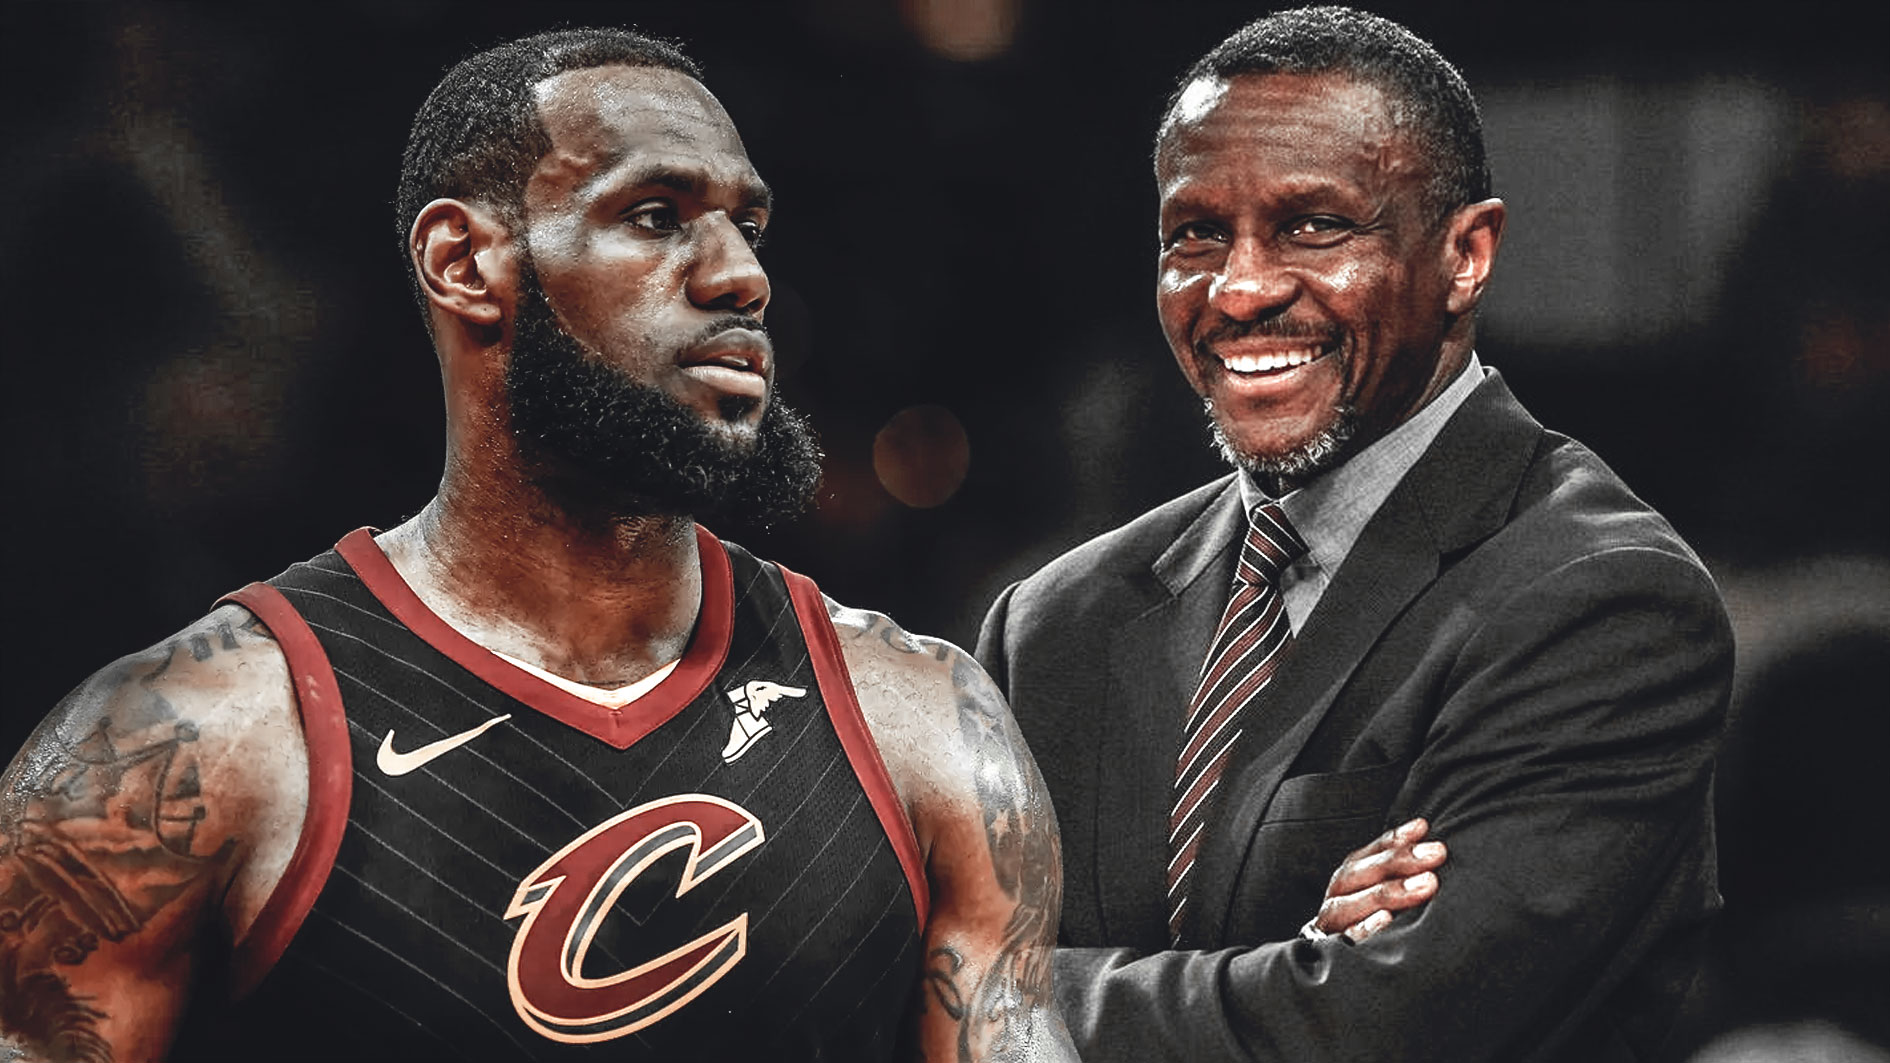 LeBron-James-talks-about-Dwane-Casey_s-role-in-influencing-his-evolution